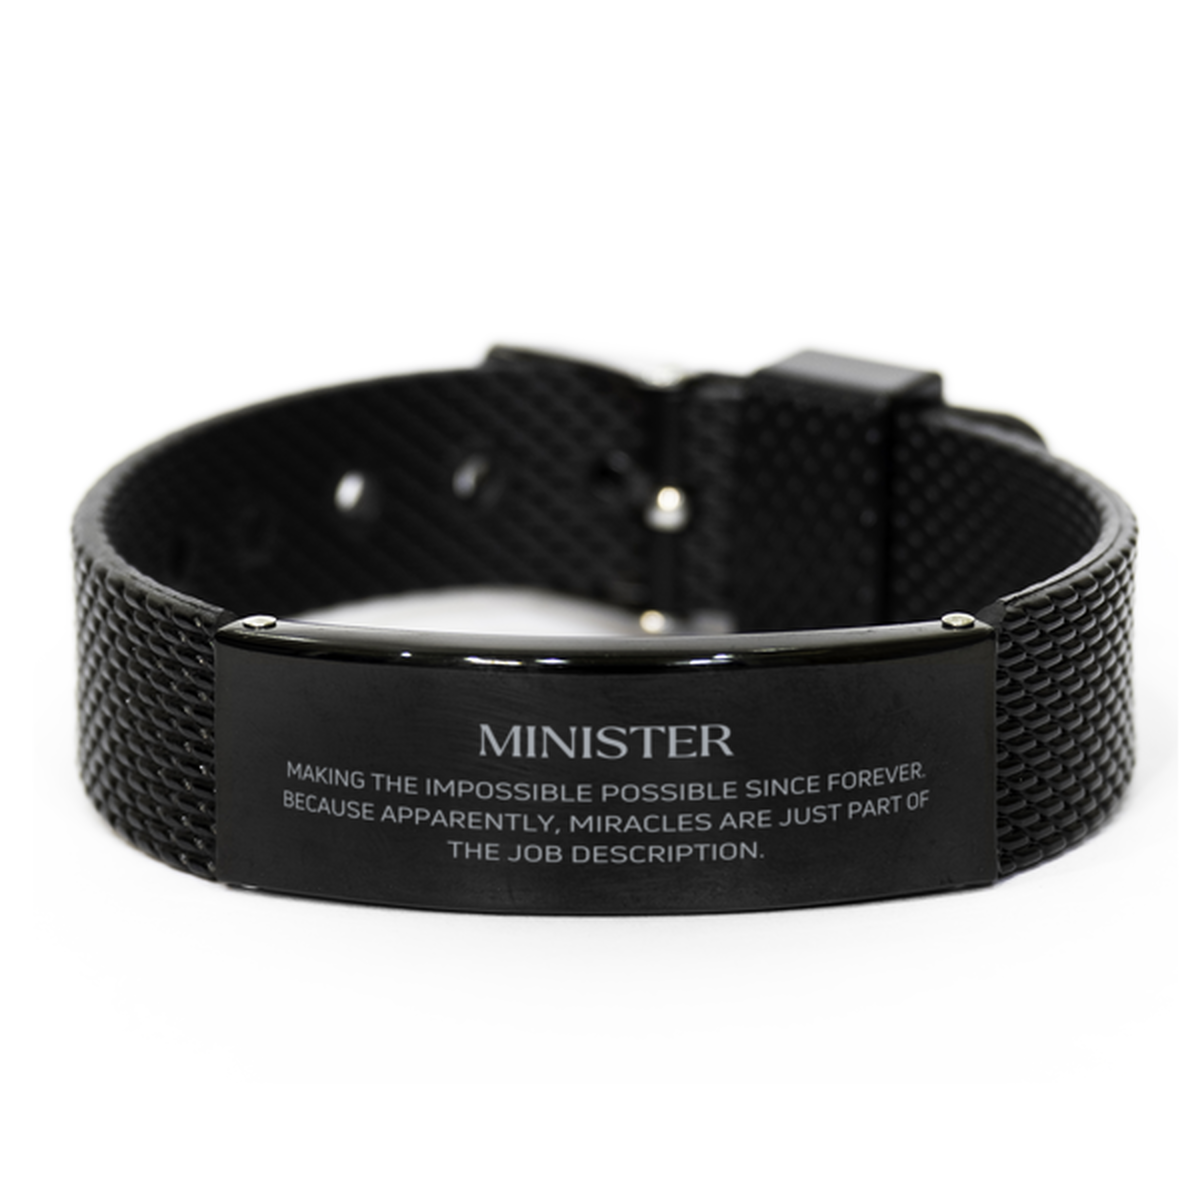 Funny Minister Gifts, Miracles are just part of the job description, Inspirational Birthday Black Shark Mesh Bracelet For Minister, Men, Women, Coworkers, Friends, Boss